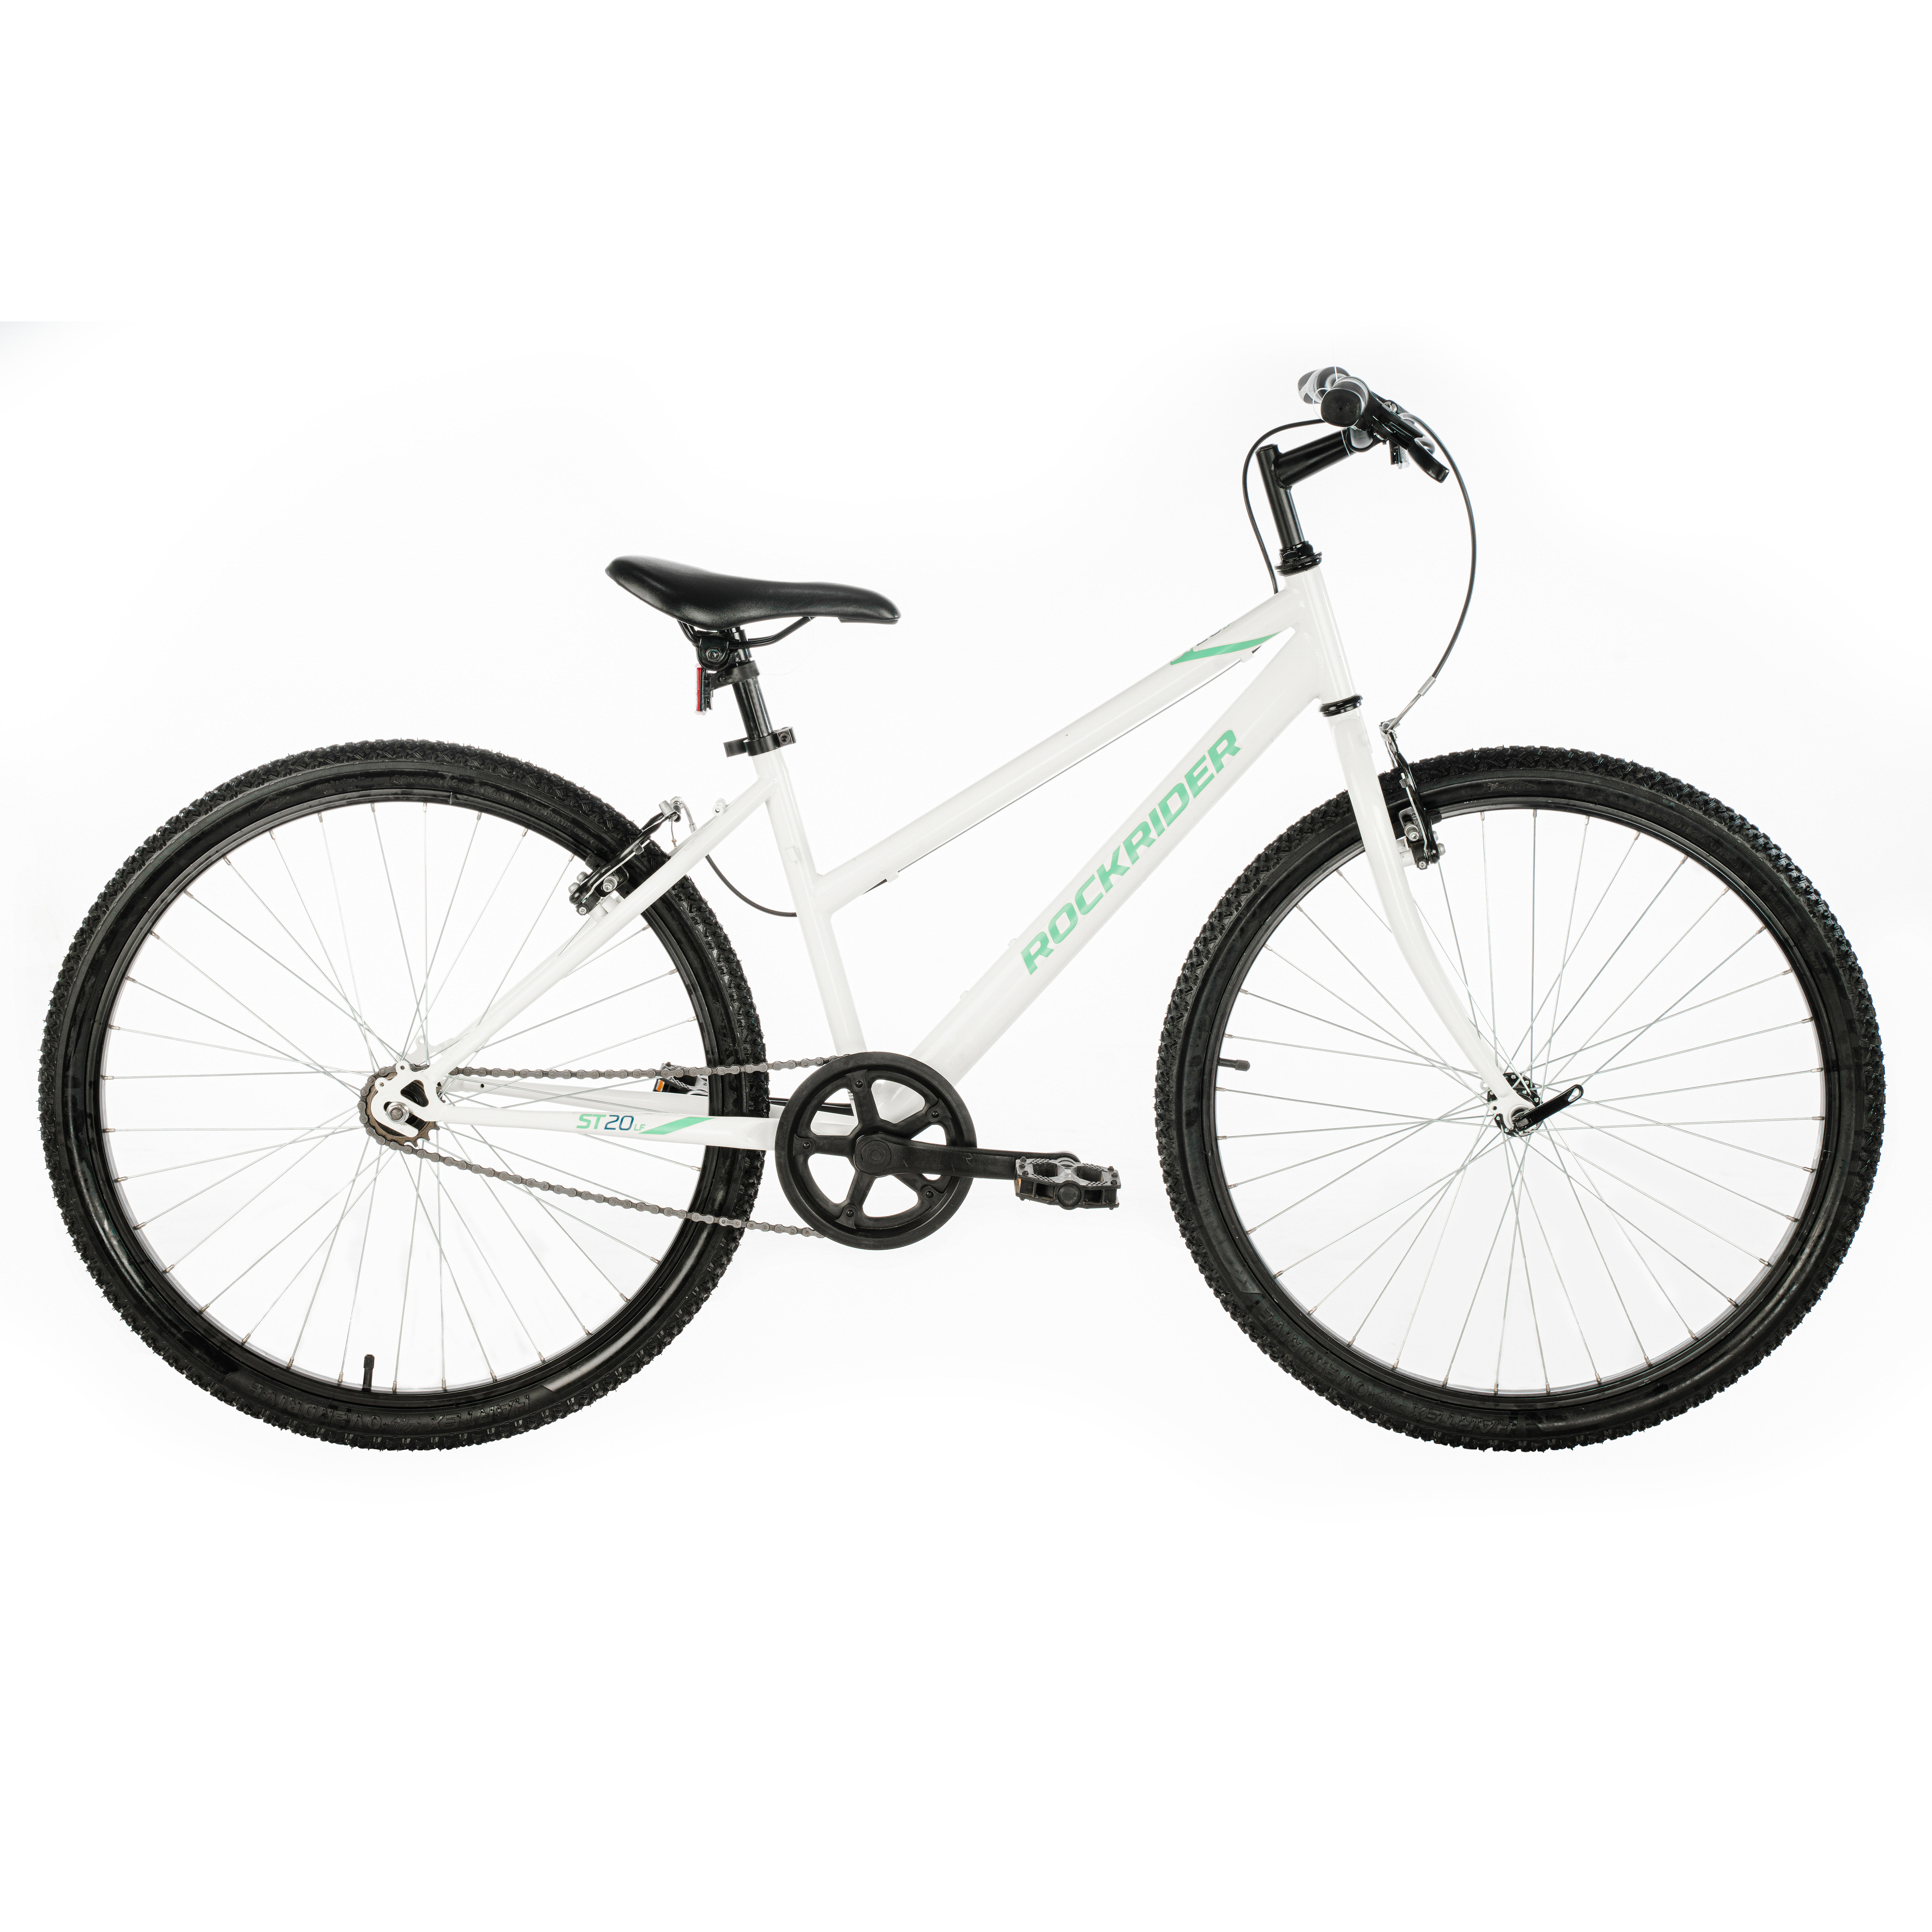 decathlon cycling accessories